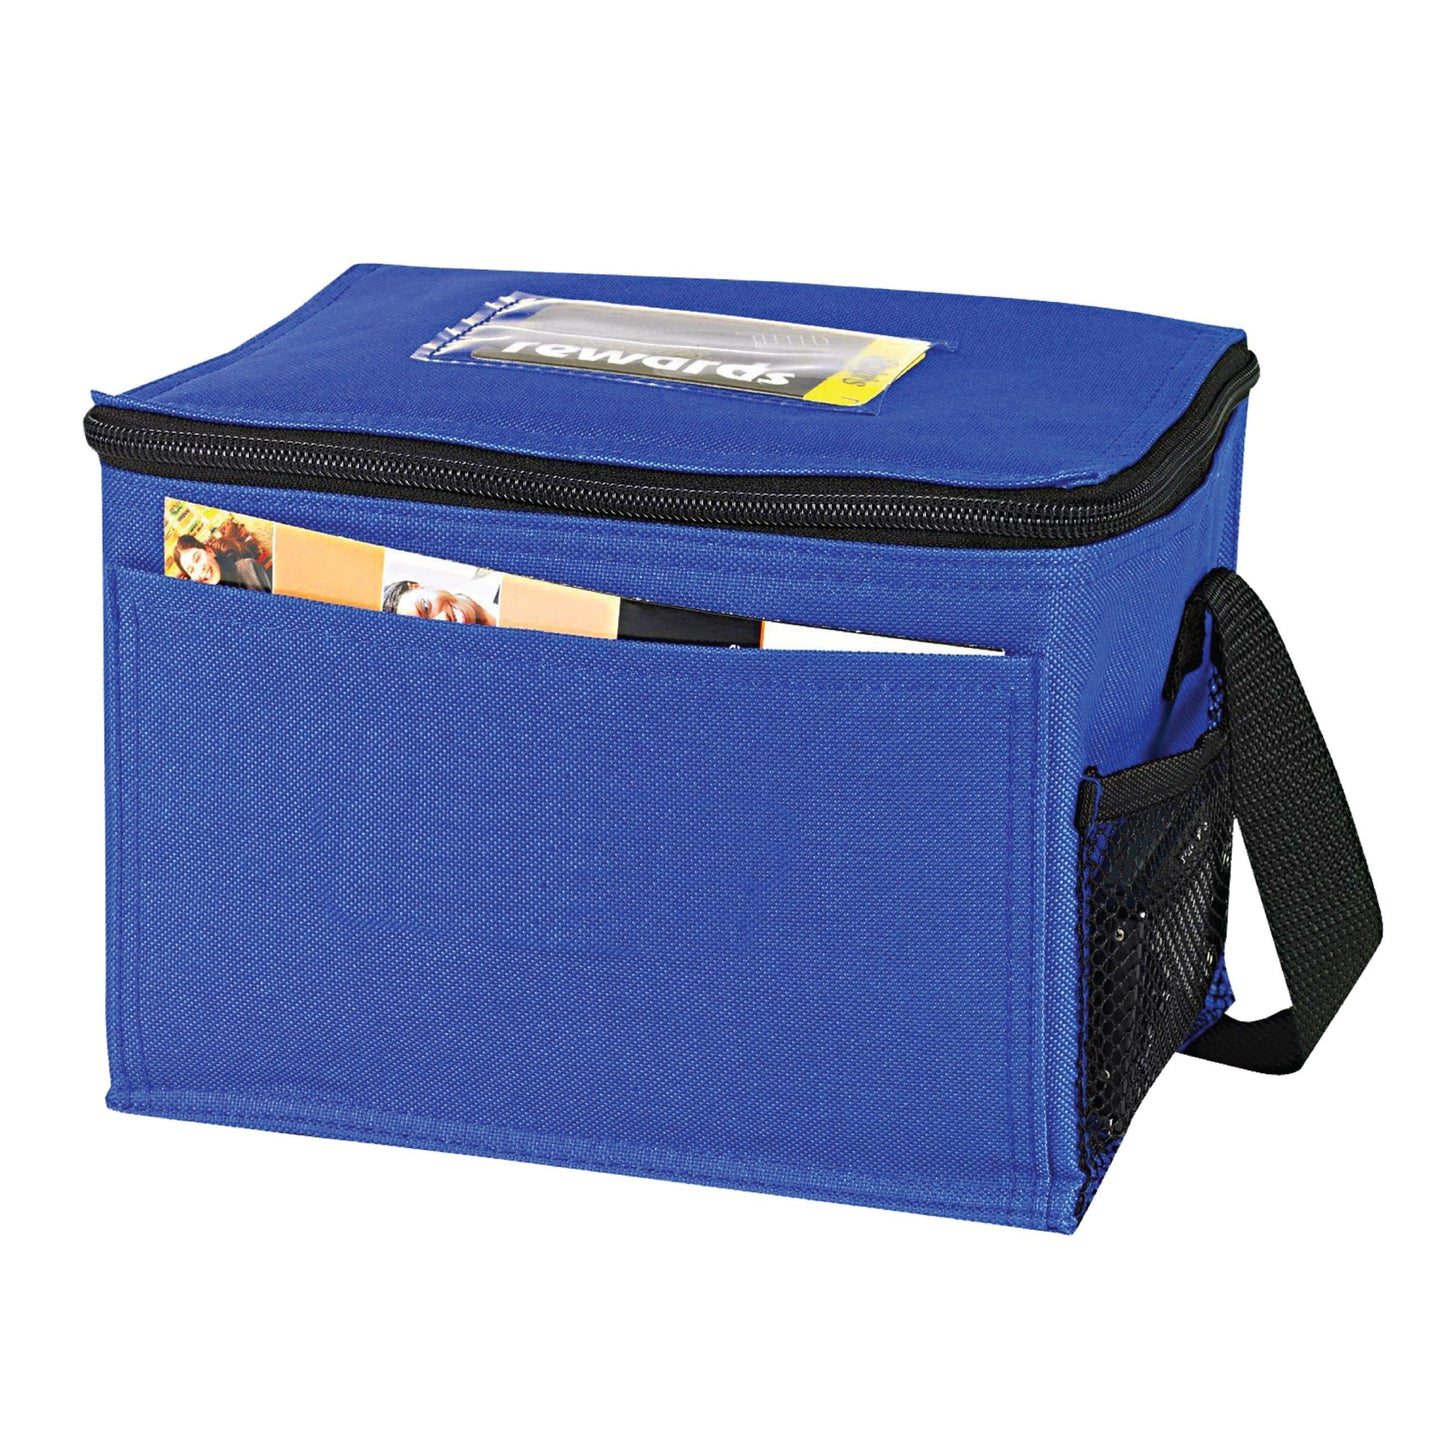 Bedford 6 Pack Insulated Cooler